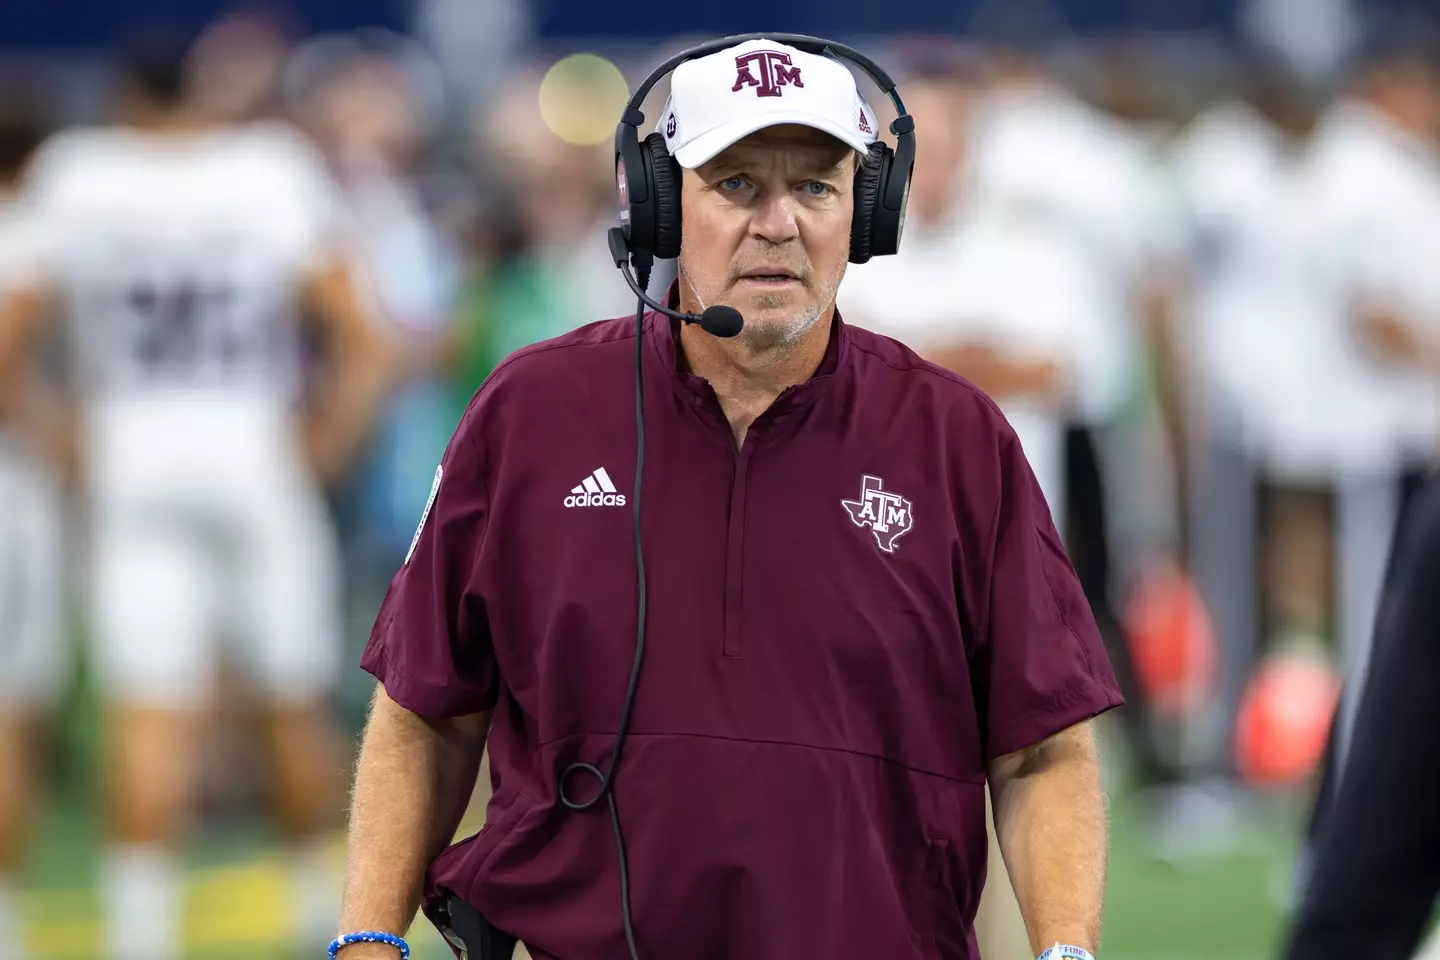 Jimbo Fisher joined A&M in 2017.